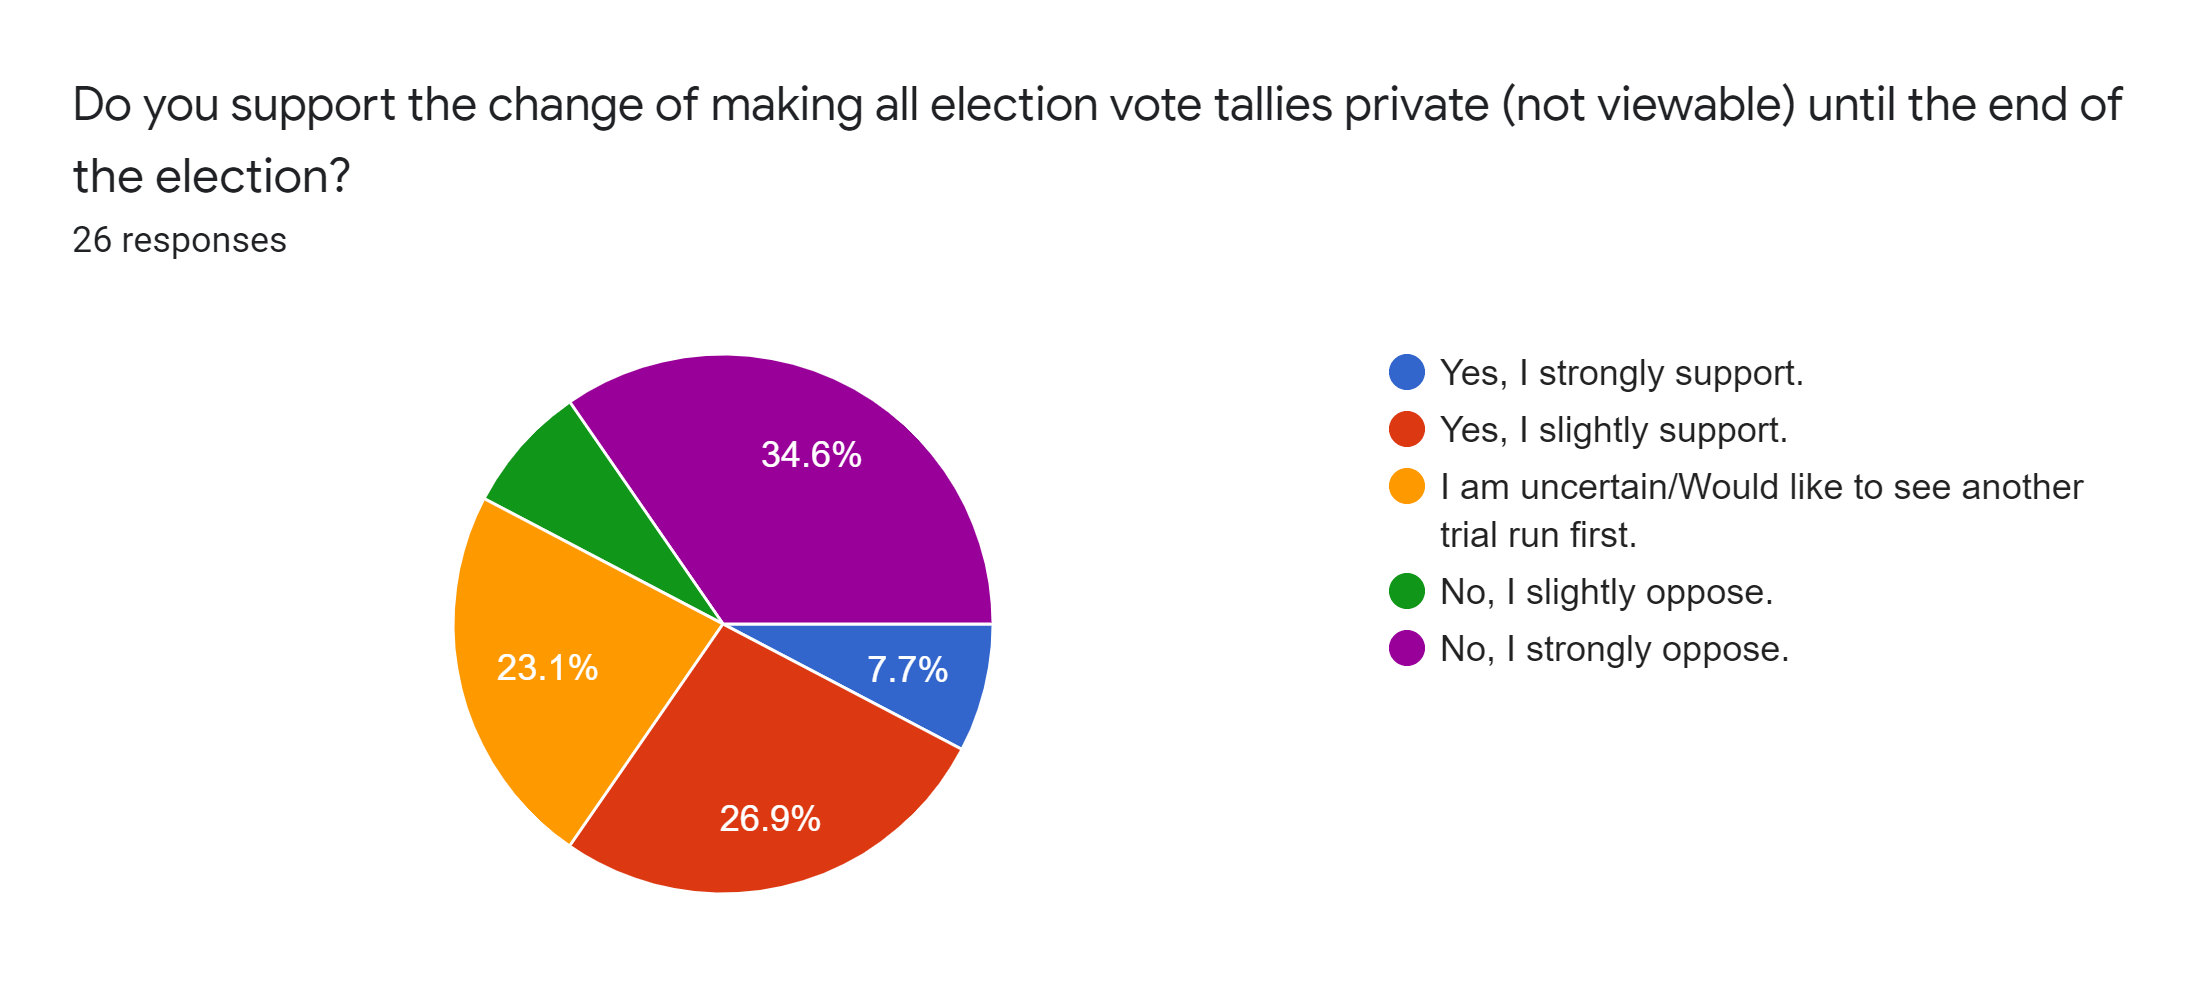 Forms response chart. Question title: Do you support the change of making all election vote tallies private (not viewable) until the end of the election?. Number of responses: 26 responses.